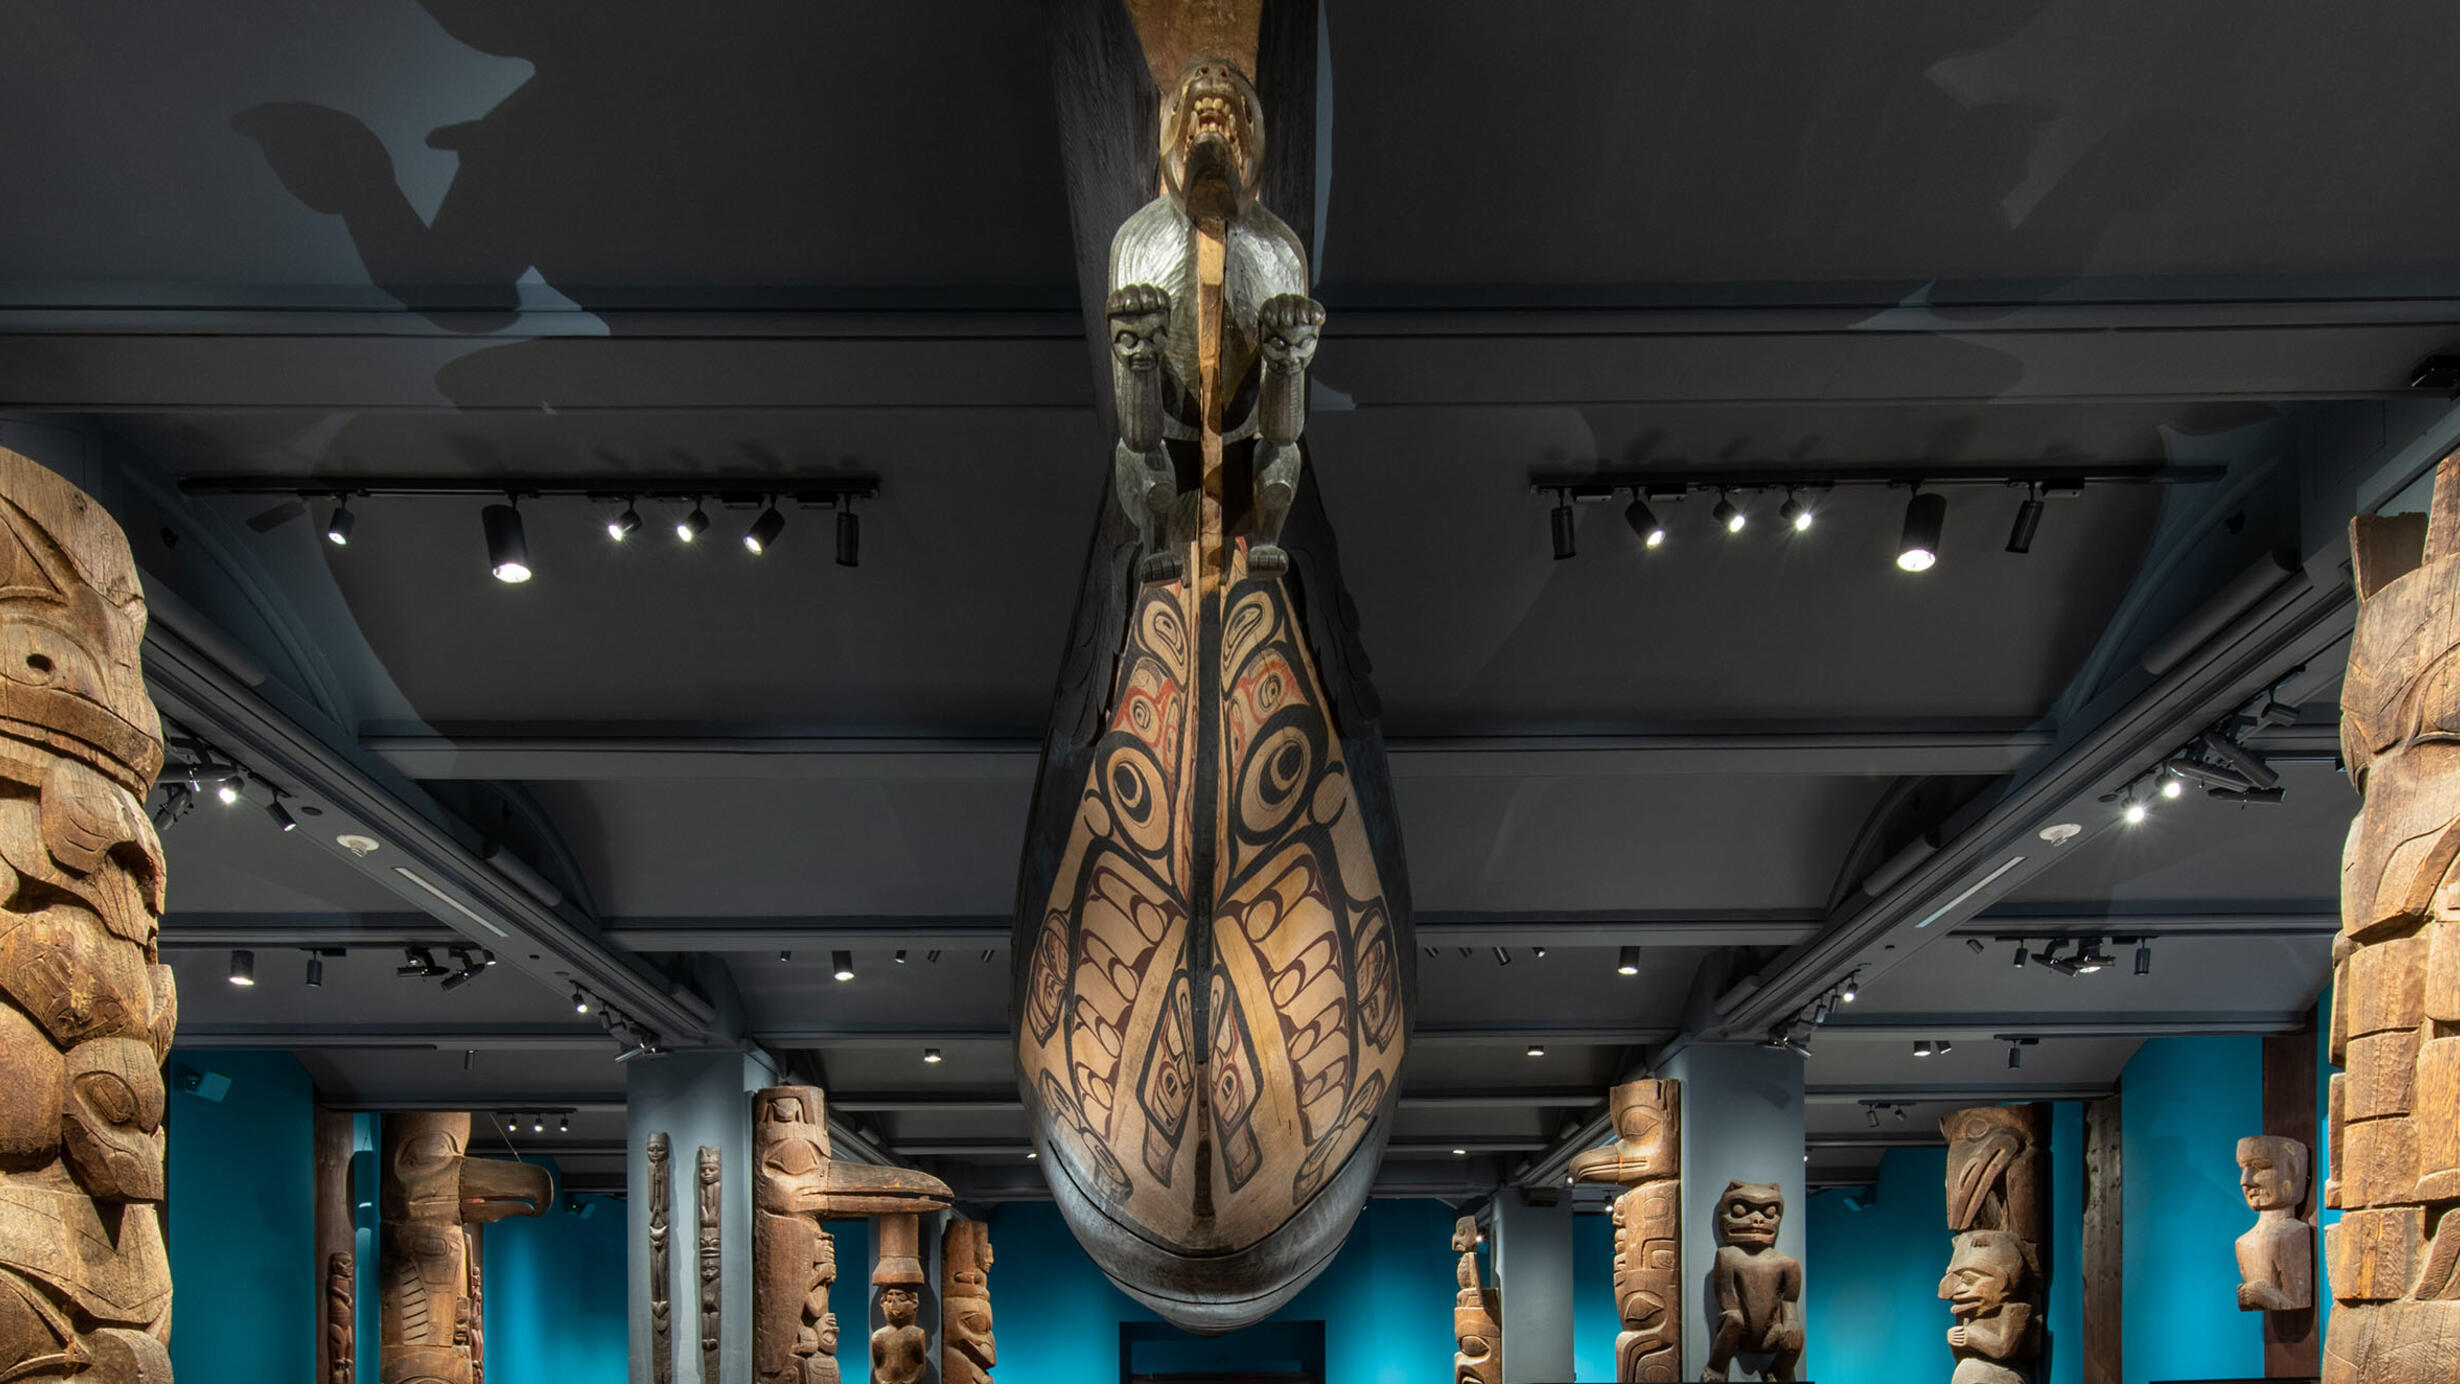 An immense canoe with a prow in the form of a wolf hangs from the ceiling of a Museum hall.